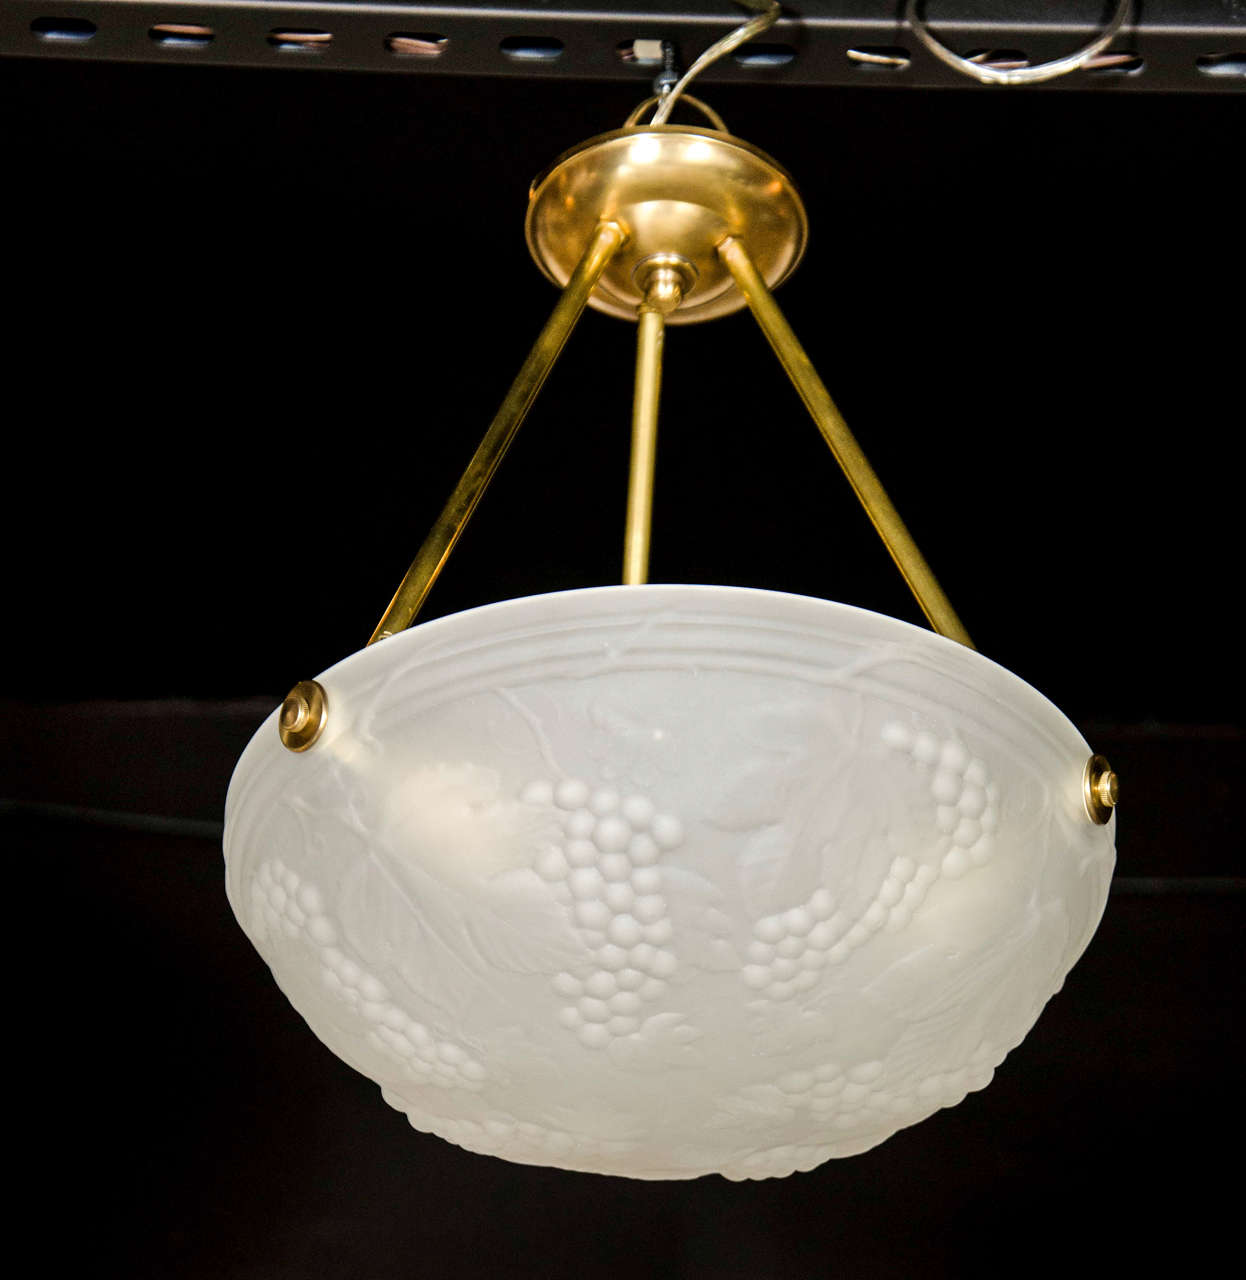 This elegant Art Deco flush mount chandelier features a frosted glass bowl shade with stylized grape and vine design with brass fittings. It is in excellent condition and has been newly rewired to American standards. The height can be adjusted to